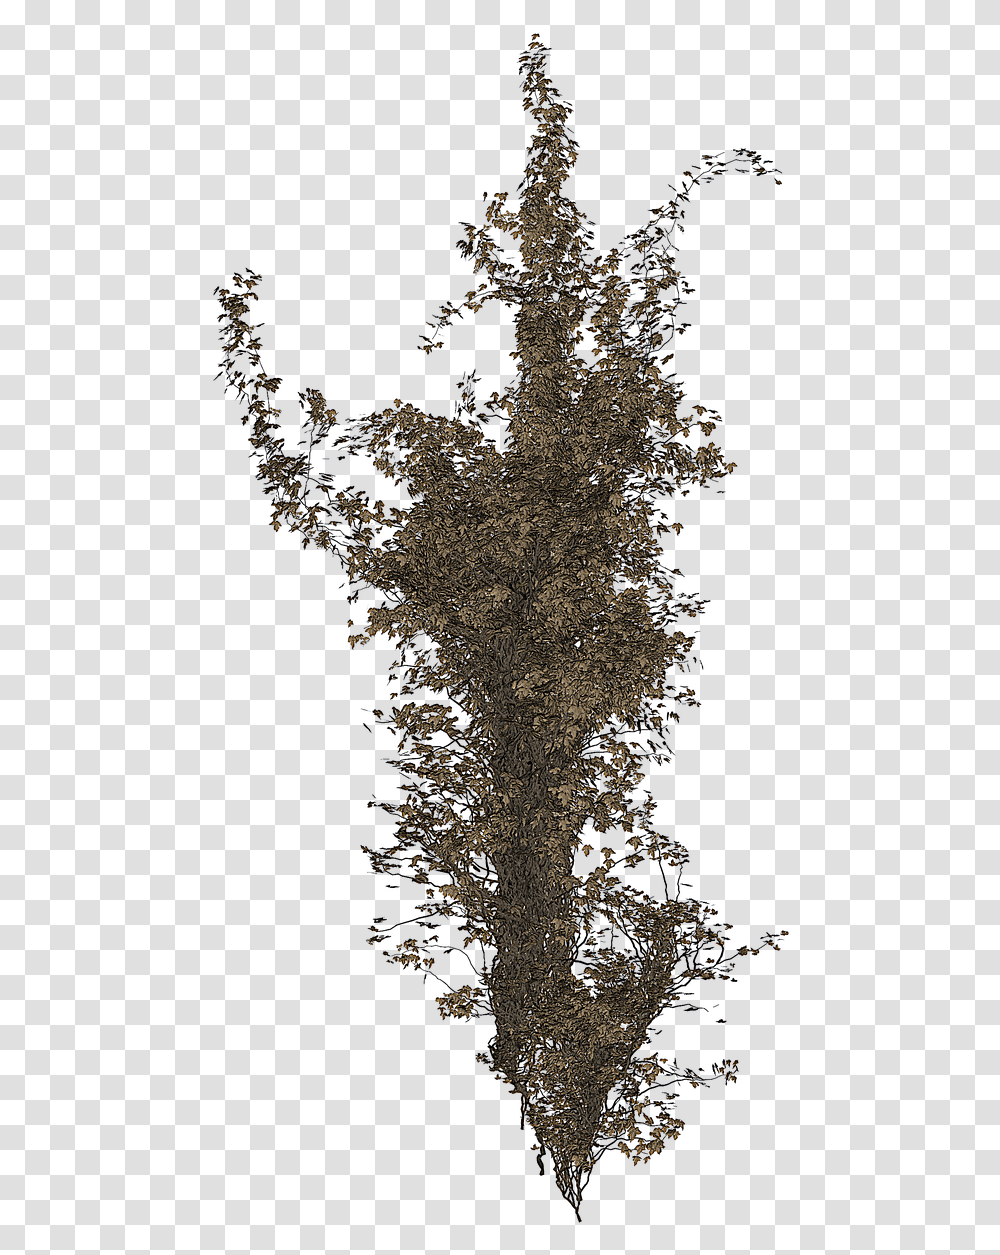 Isolated Tree Ivy Tree Portable Network Graphics, Nature, Outdoors, Landscape, Scenery Transparent Png